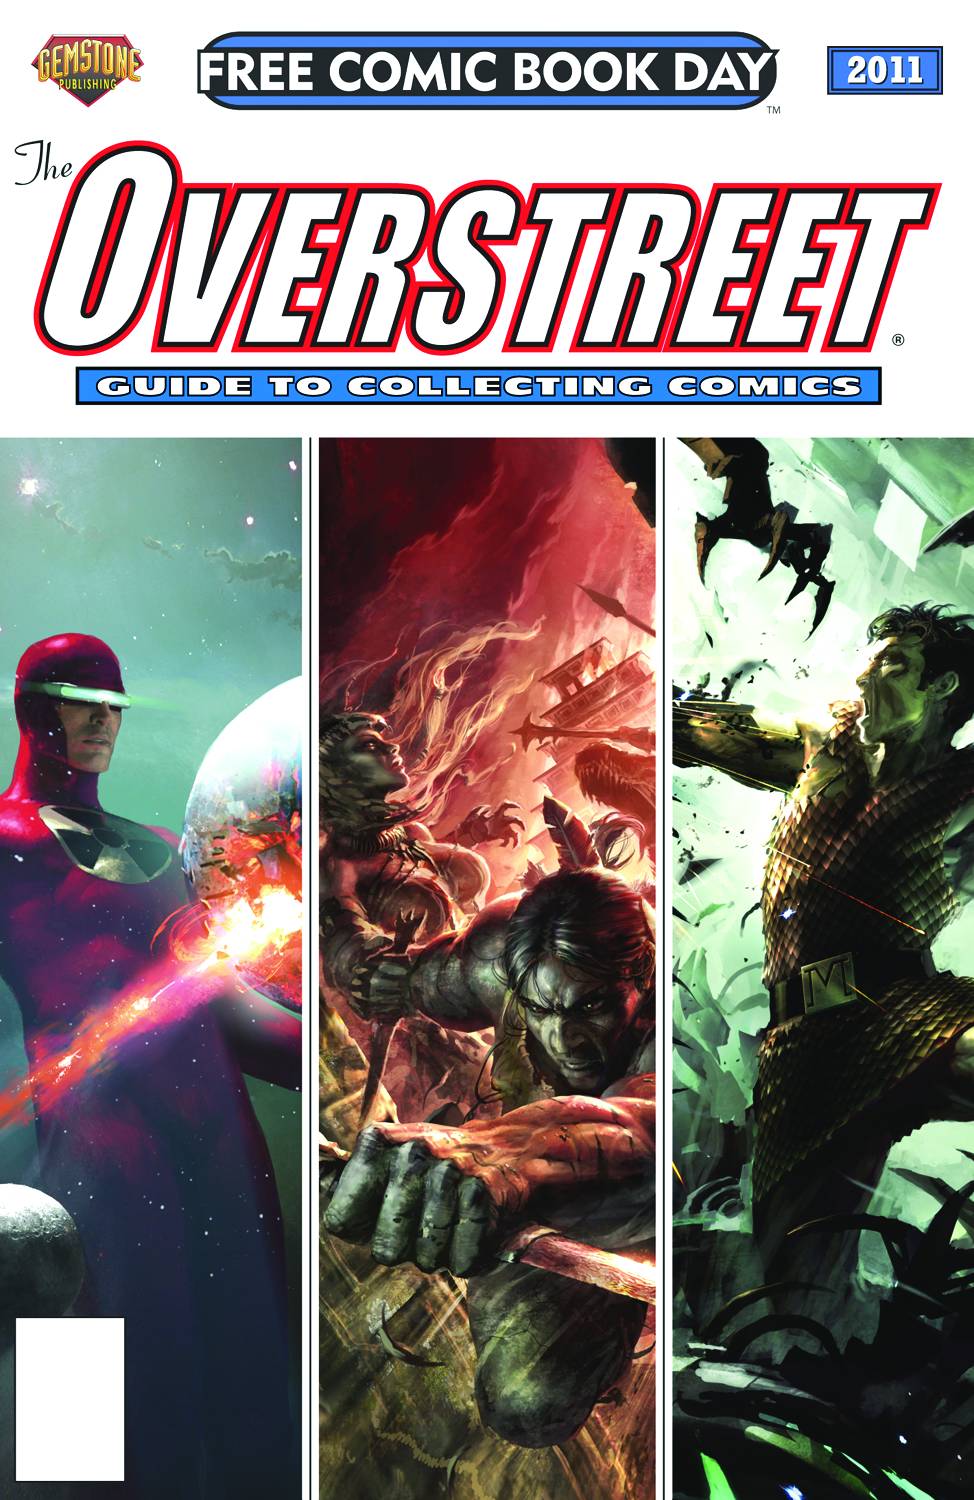 FCBD 2011 Overstreet Guide To Collecting Comics #1